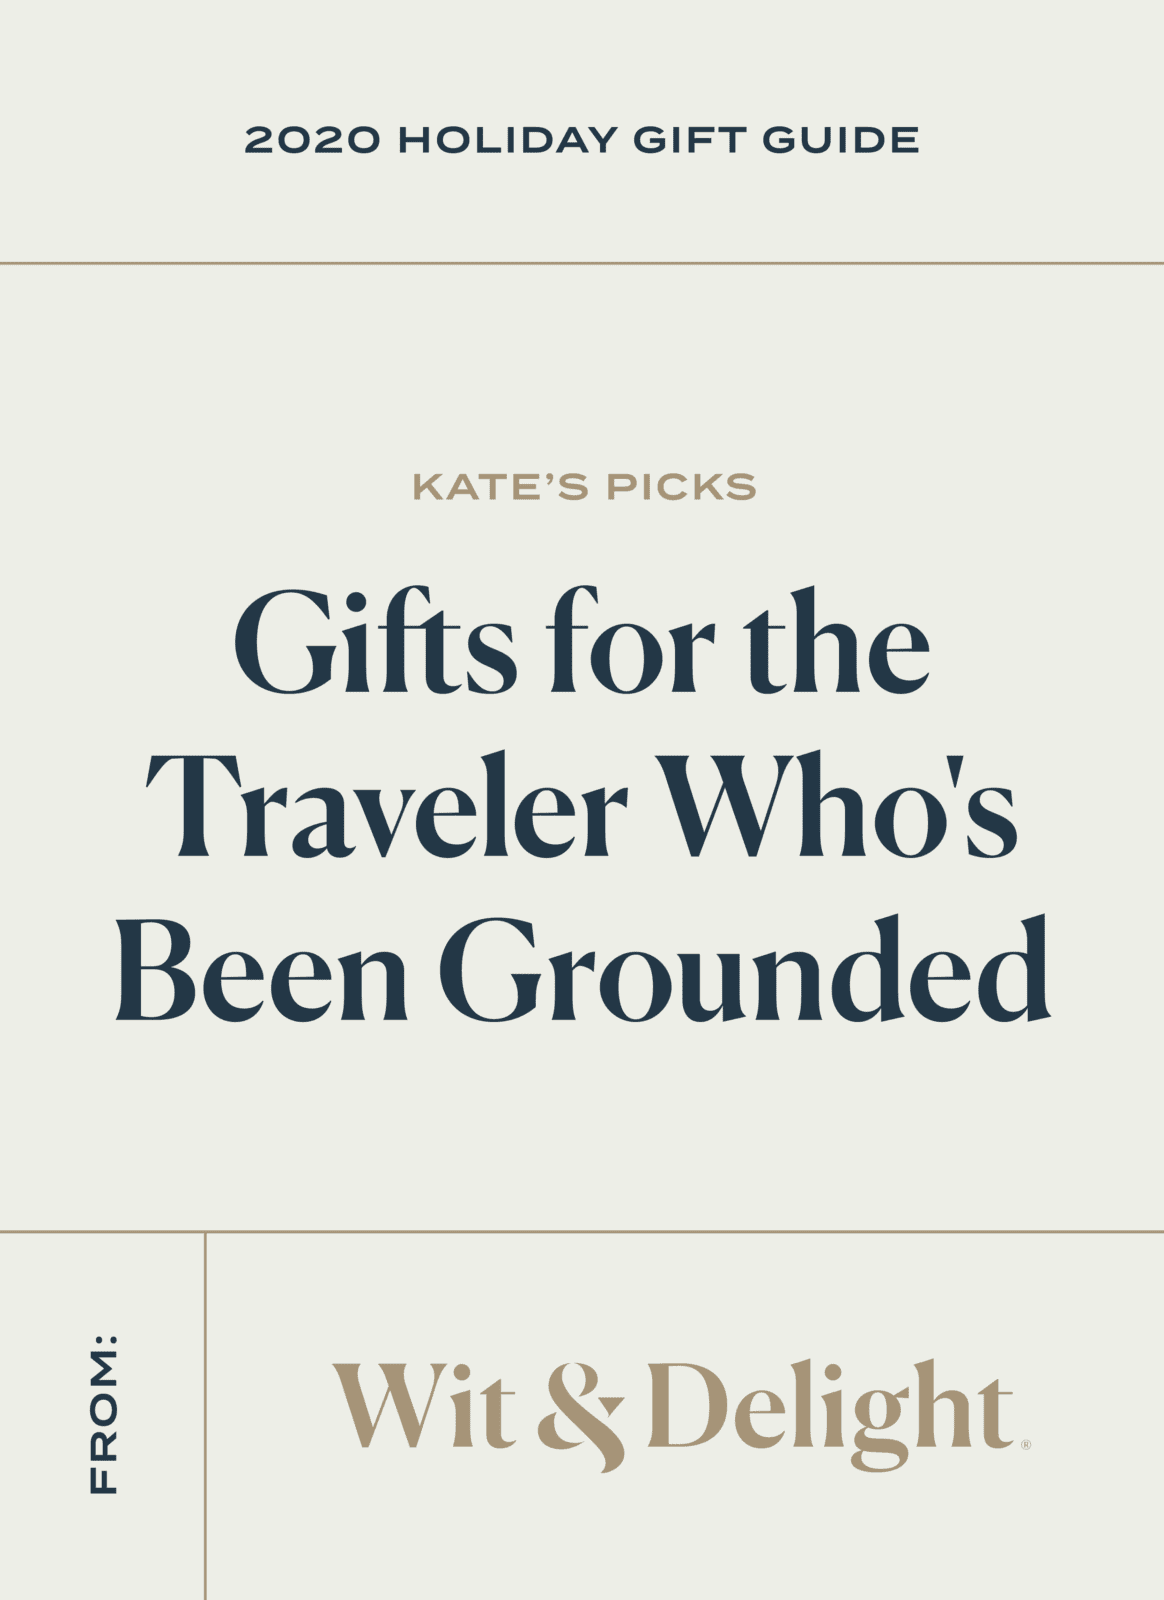 W&D 2020 Holiday Gift Guide: Gifts for the Traveler Who's Been Grounded